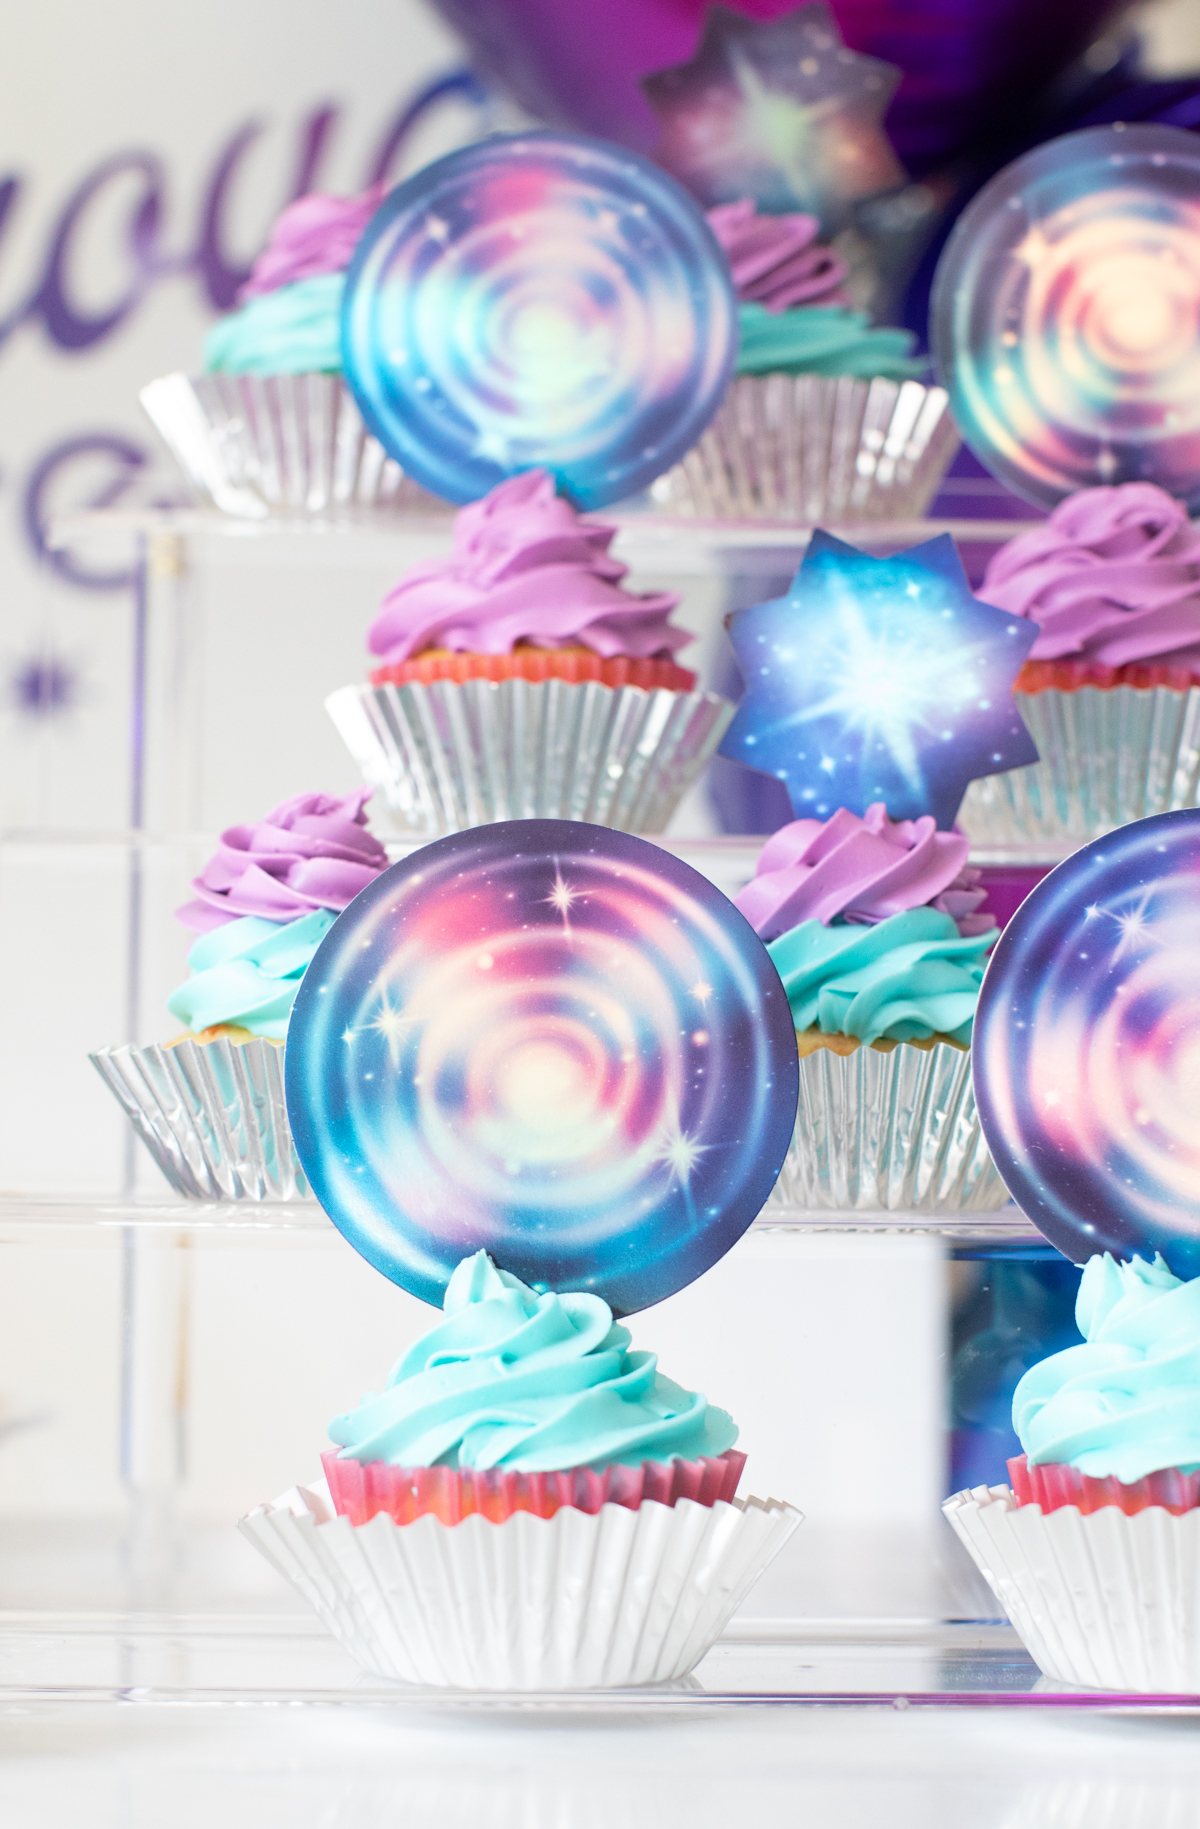 up close galaxy cupcakes on a tiered tray